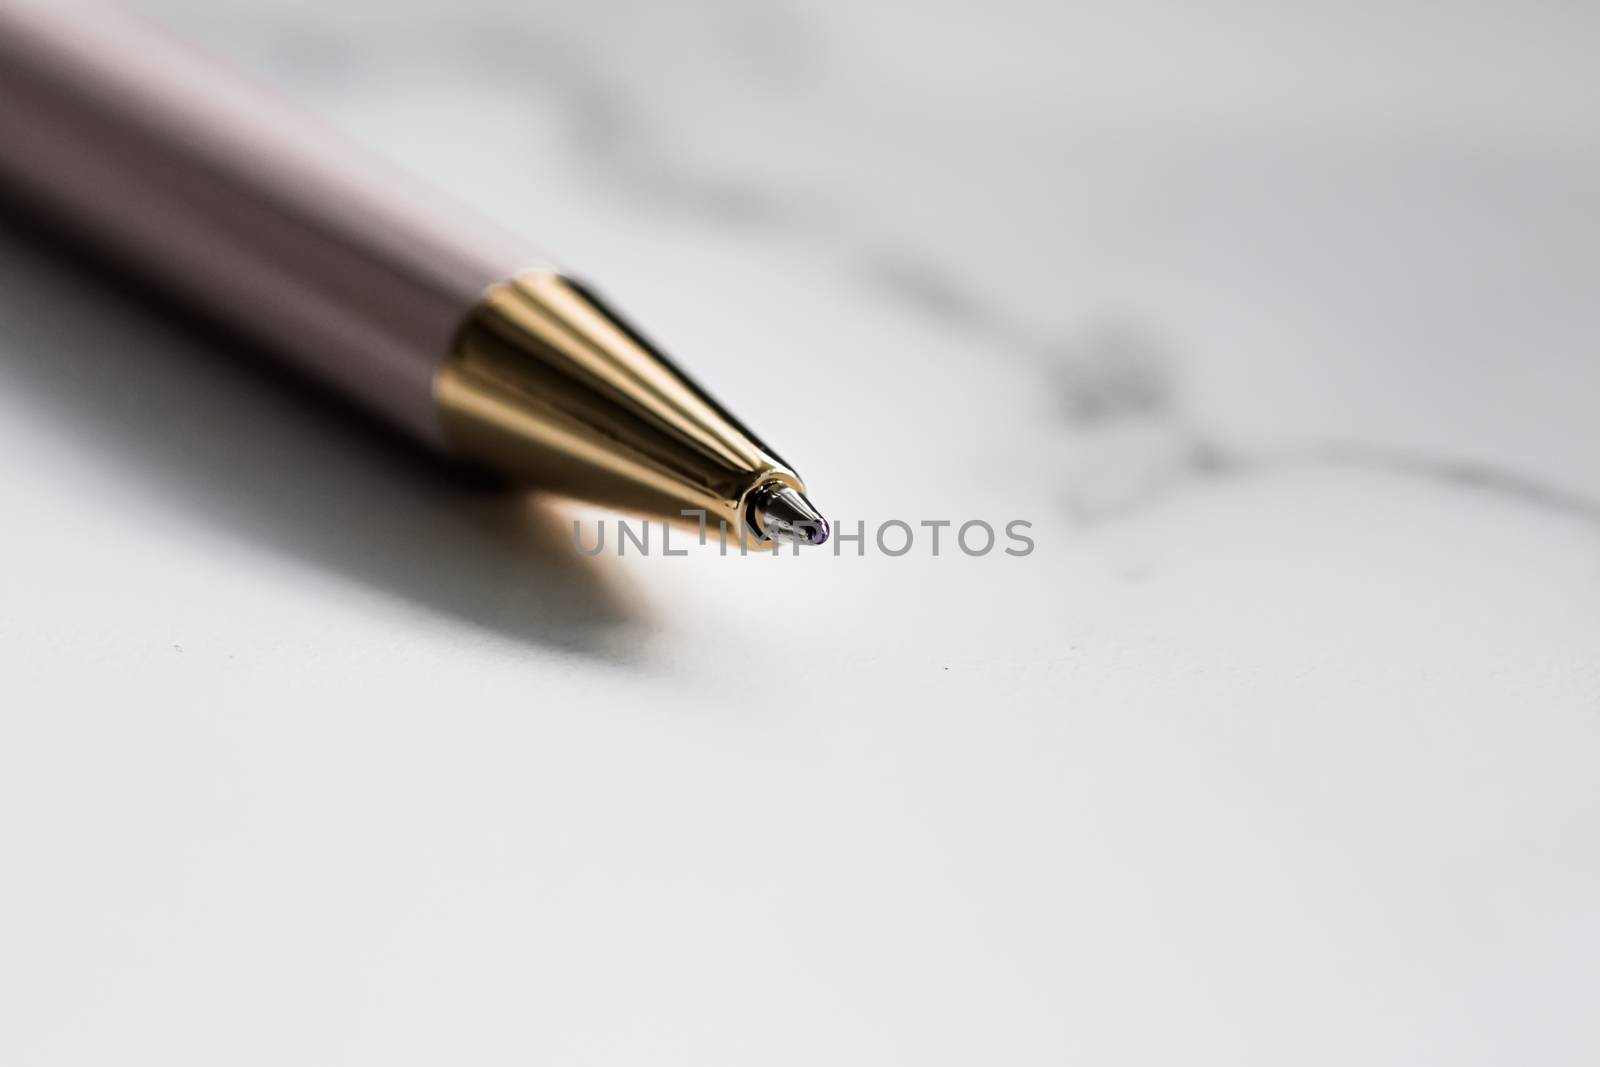 White pen on marble background, luxury stationery and business branding